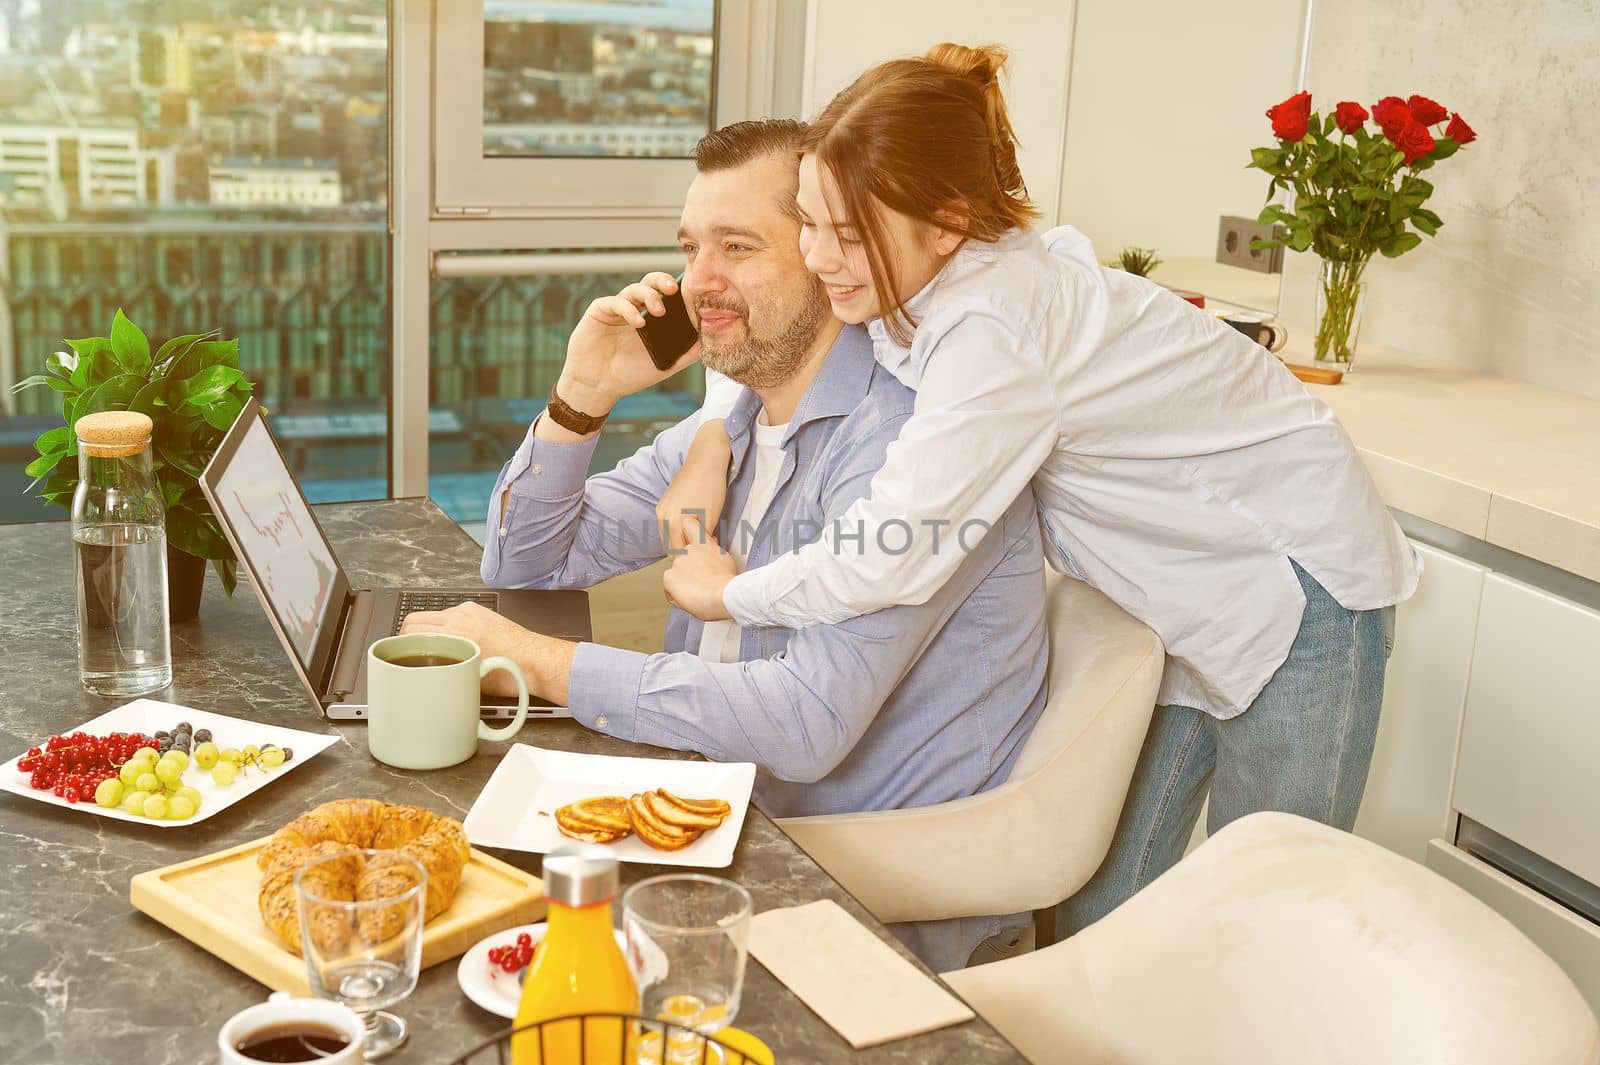 Happy father and daughter having breakfast in kitchen and using digital devices. Lifestyle by PhotoTime